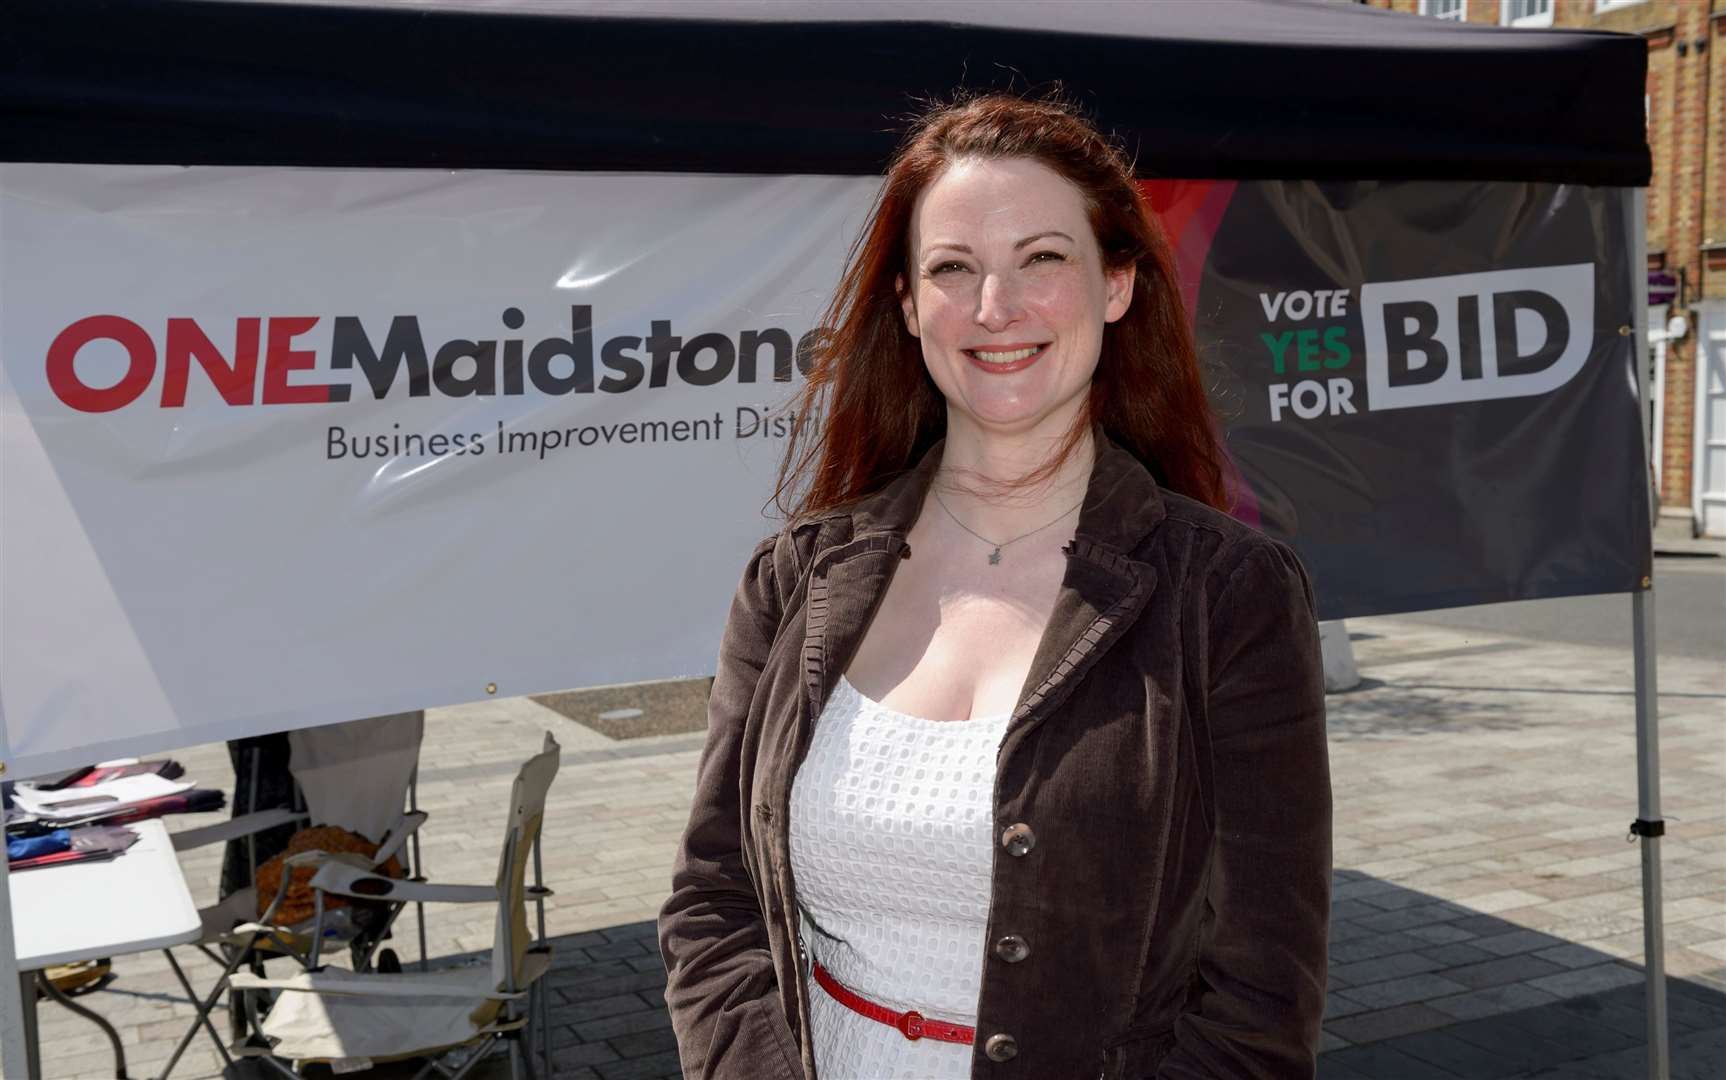 Ilsa Franklin, Operations Manager at One Maidstone BID